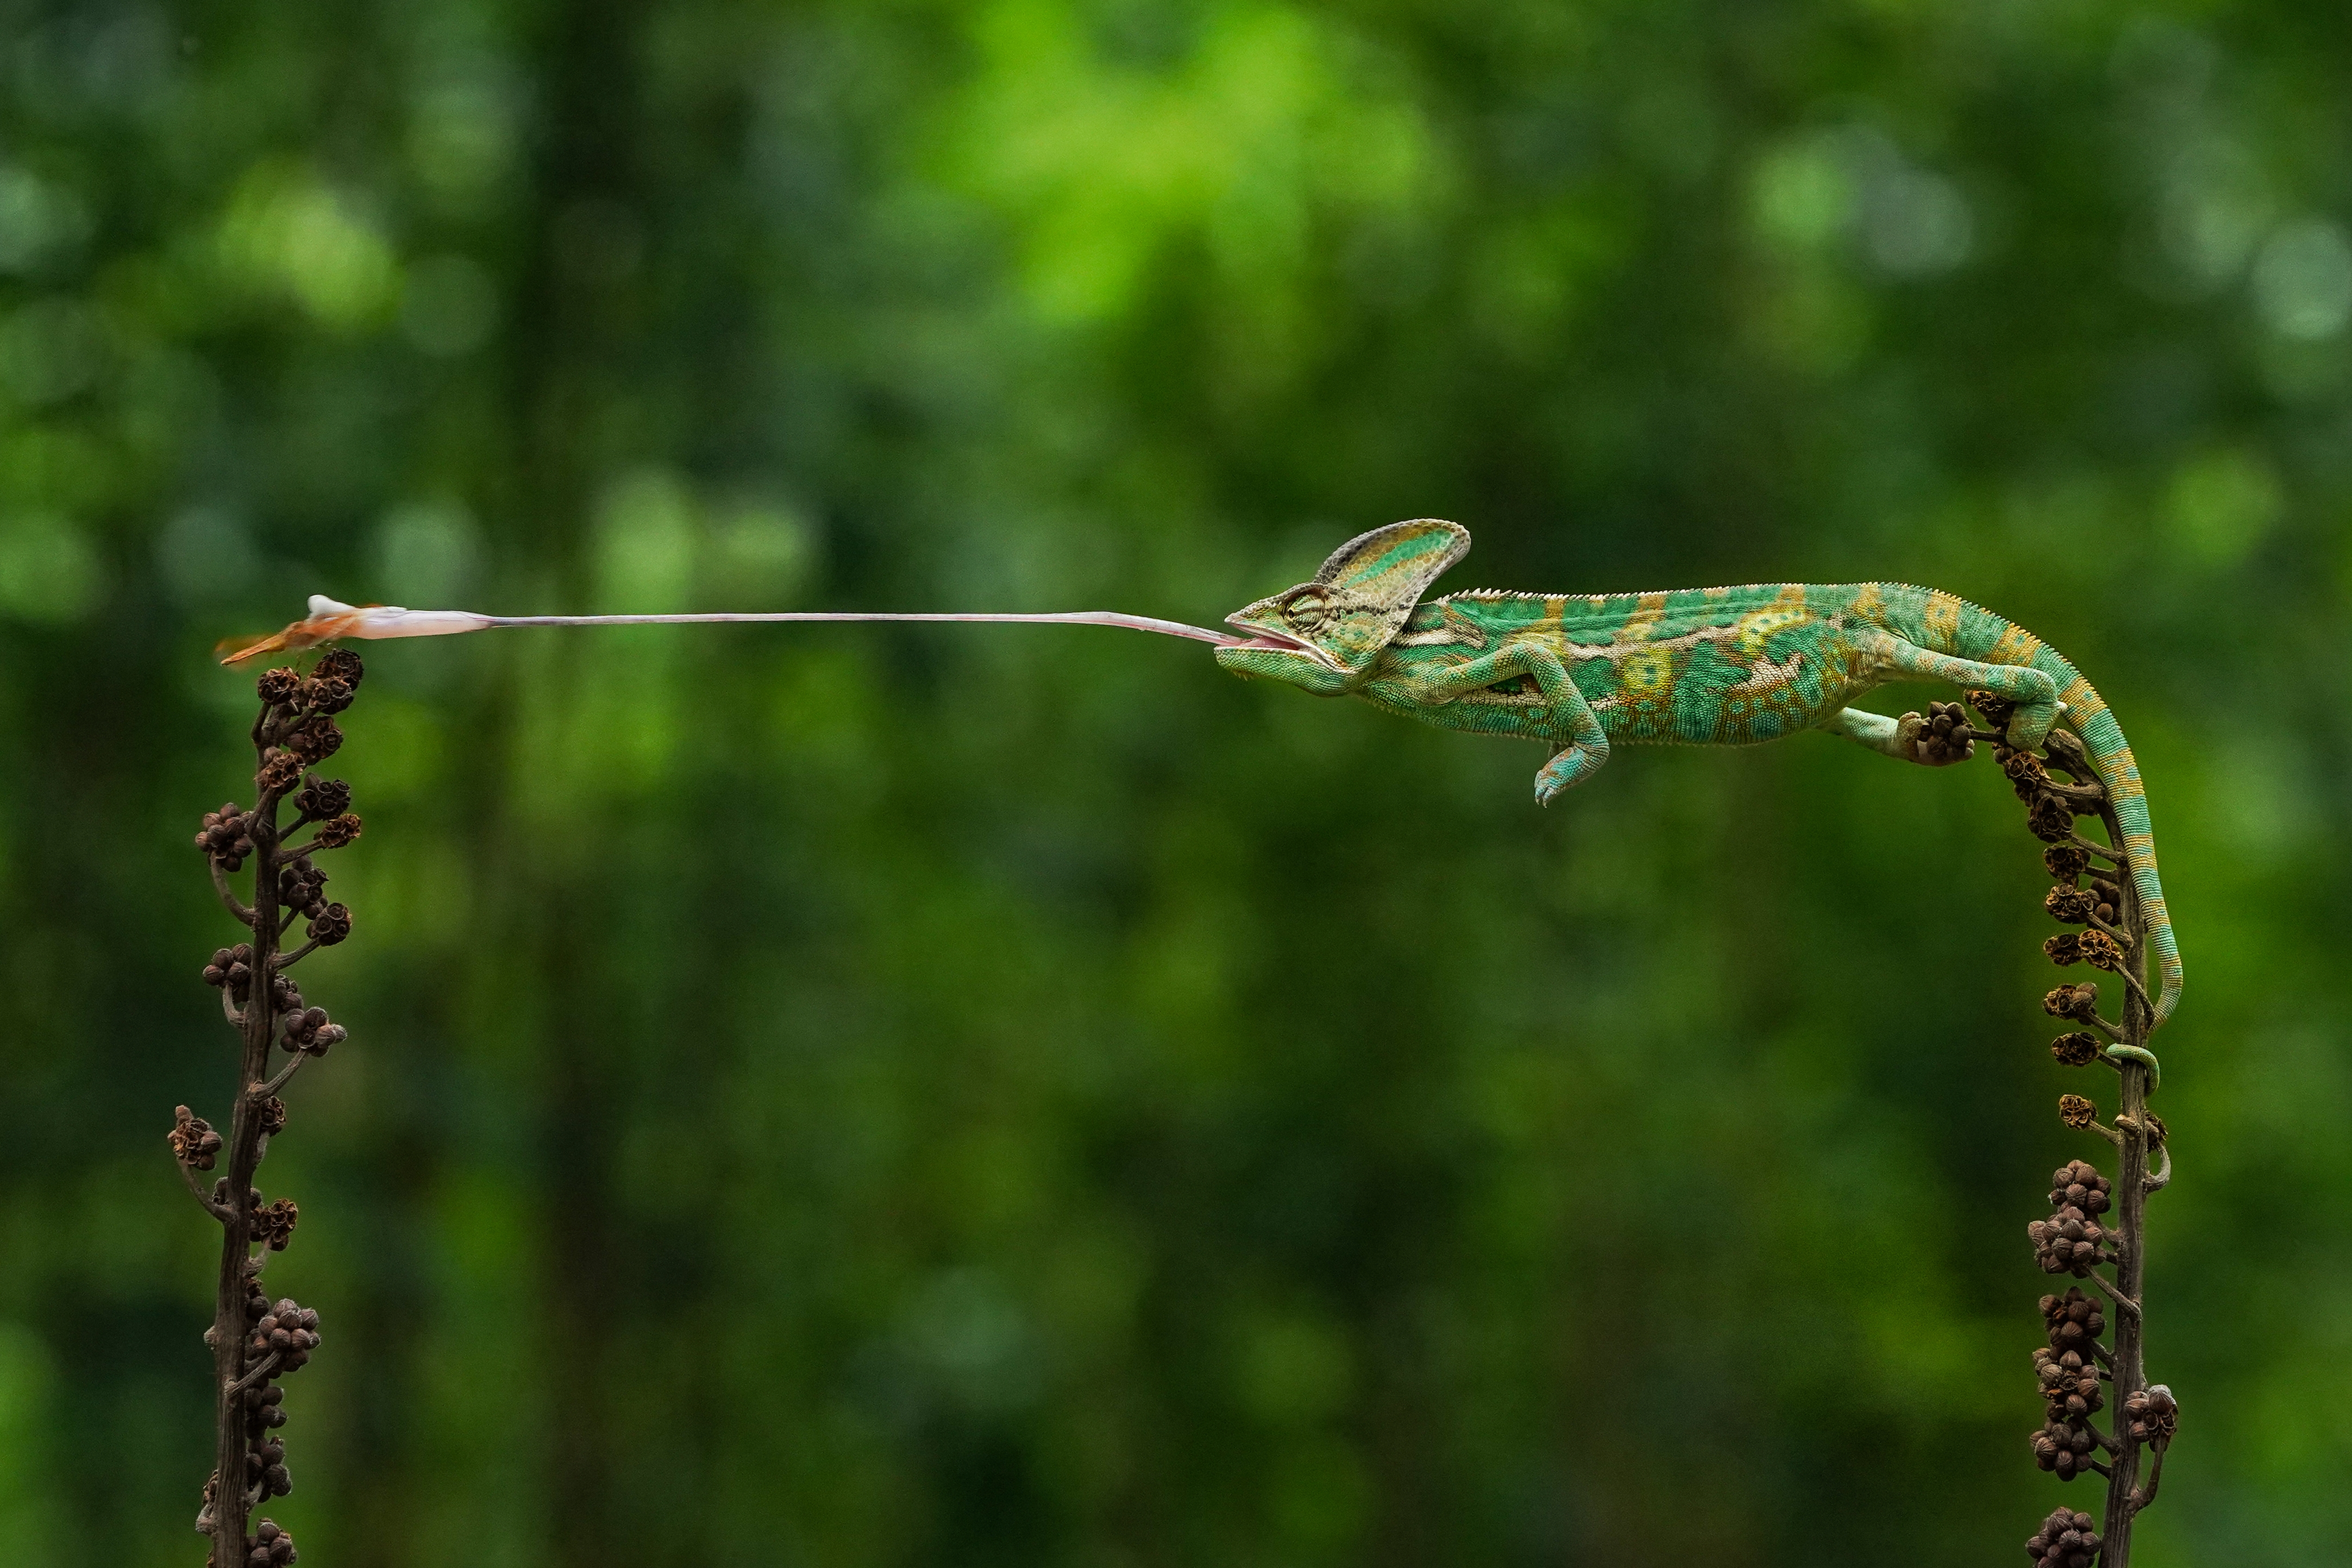 A chameleon catching a fly